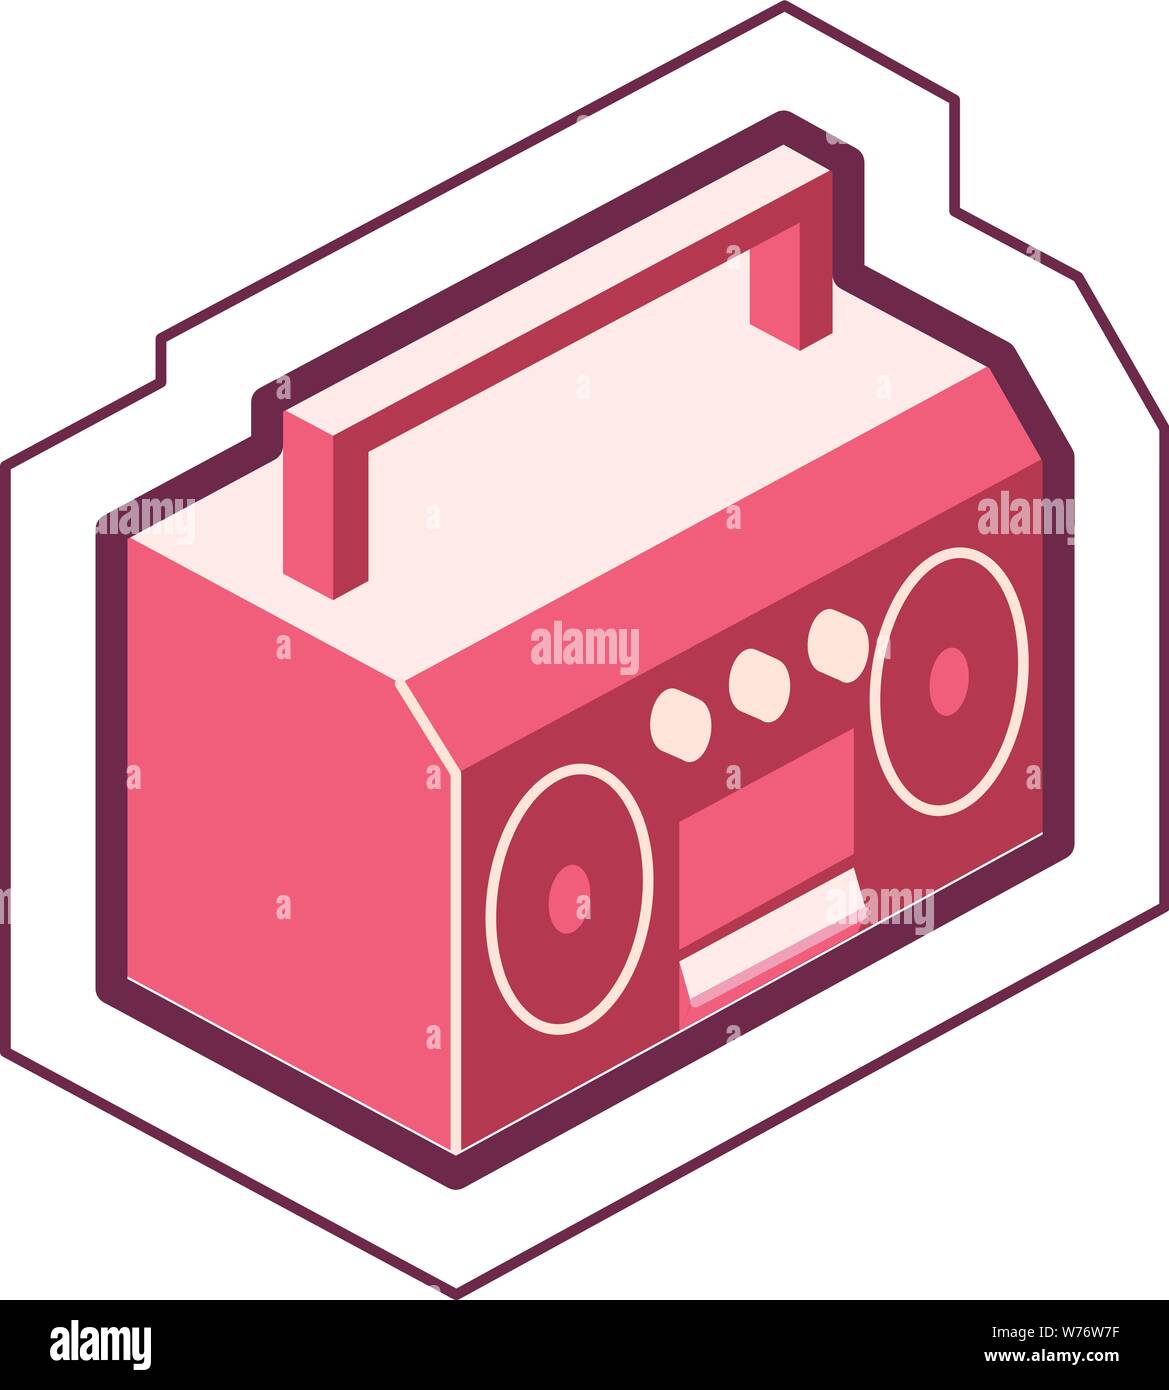 Iconic simple portable boom box sound system graphic with an outline Stock Vector